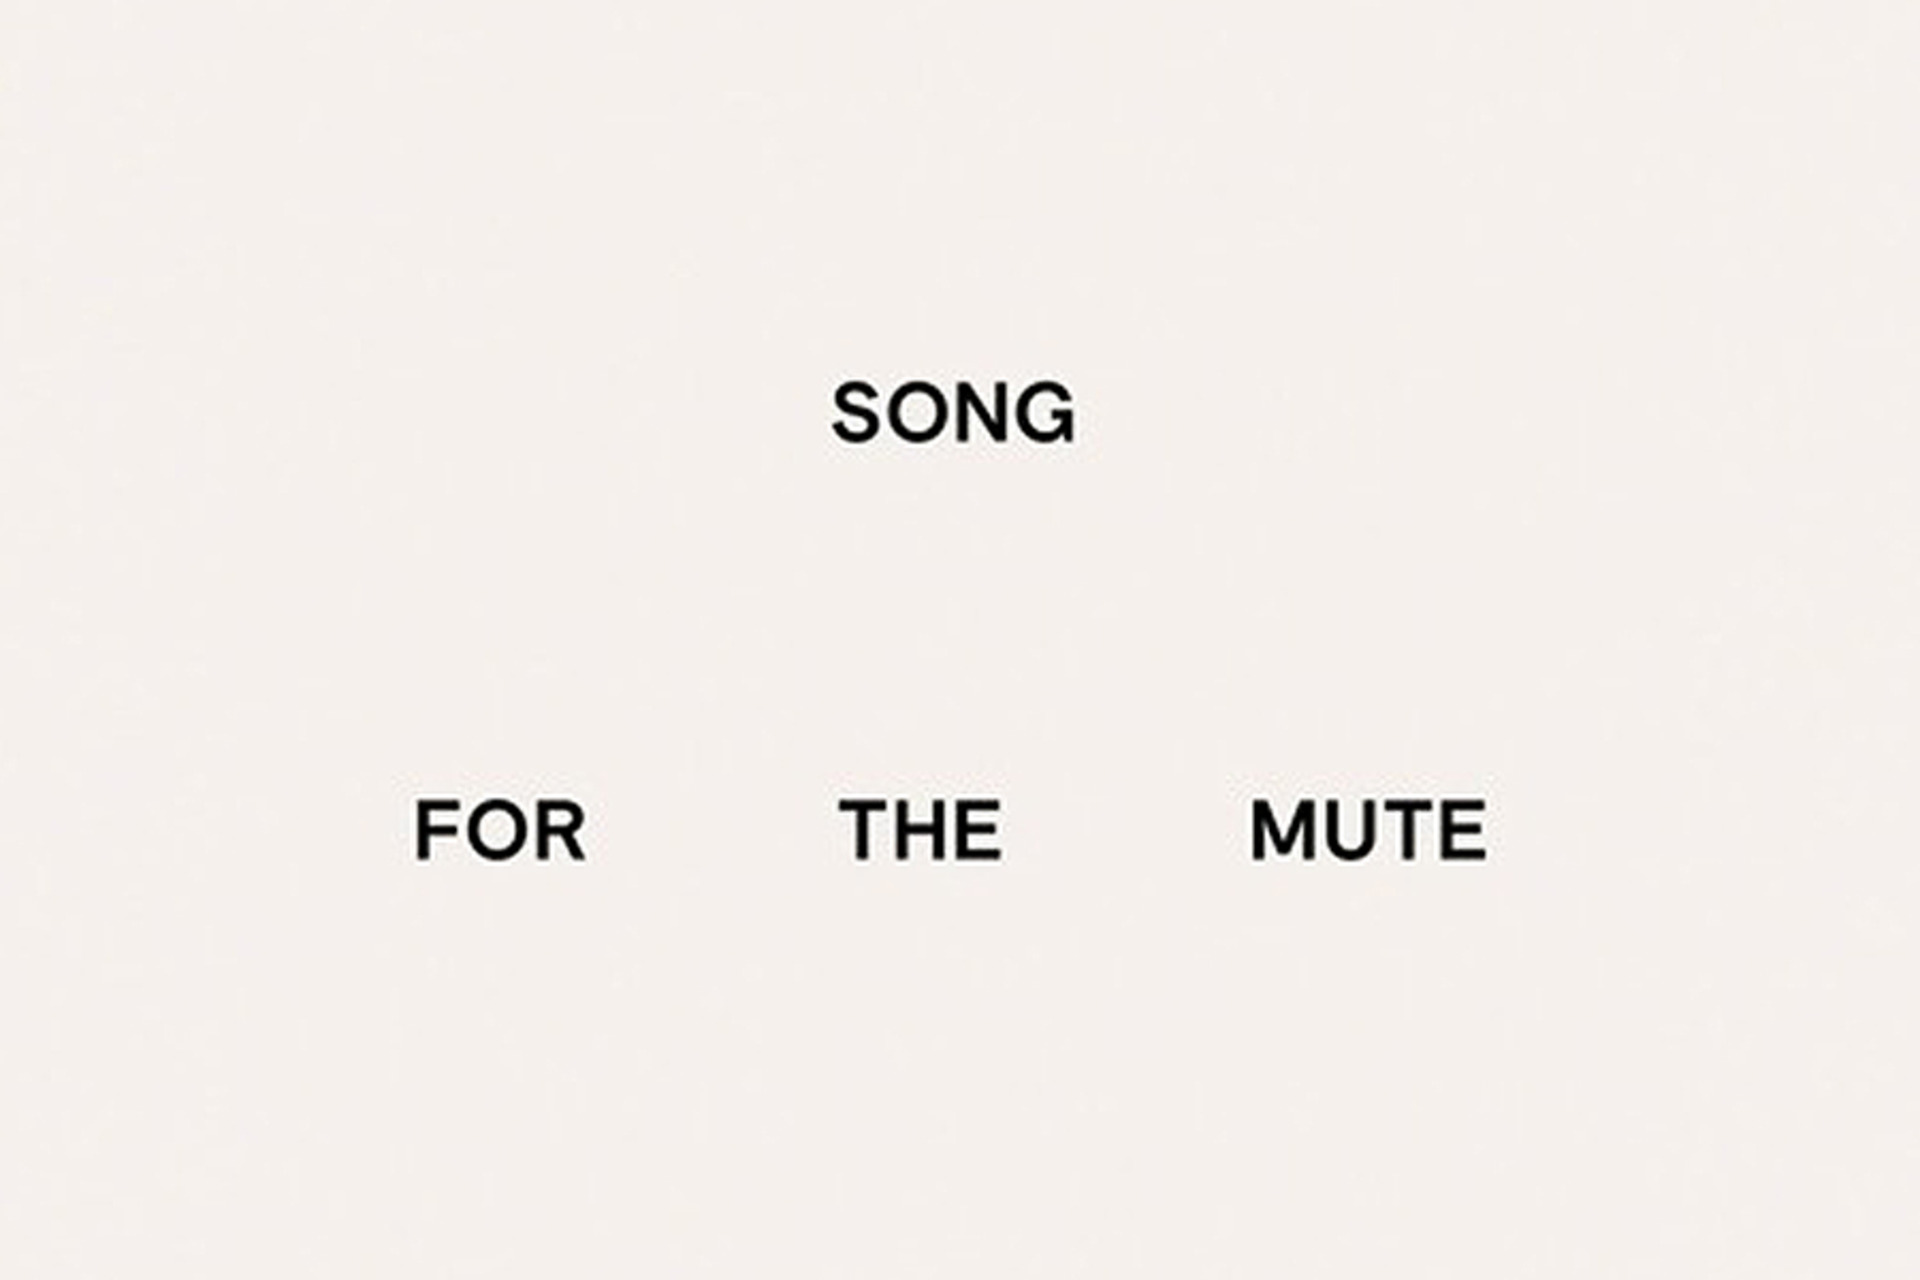 SONG FOR THE MUTE